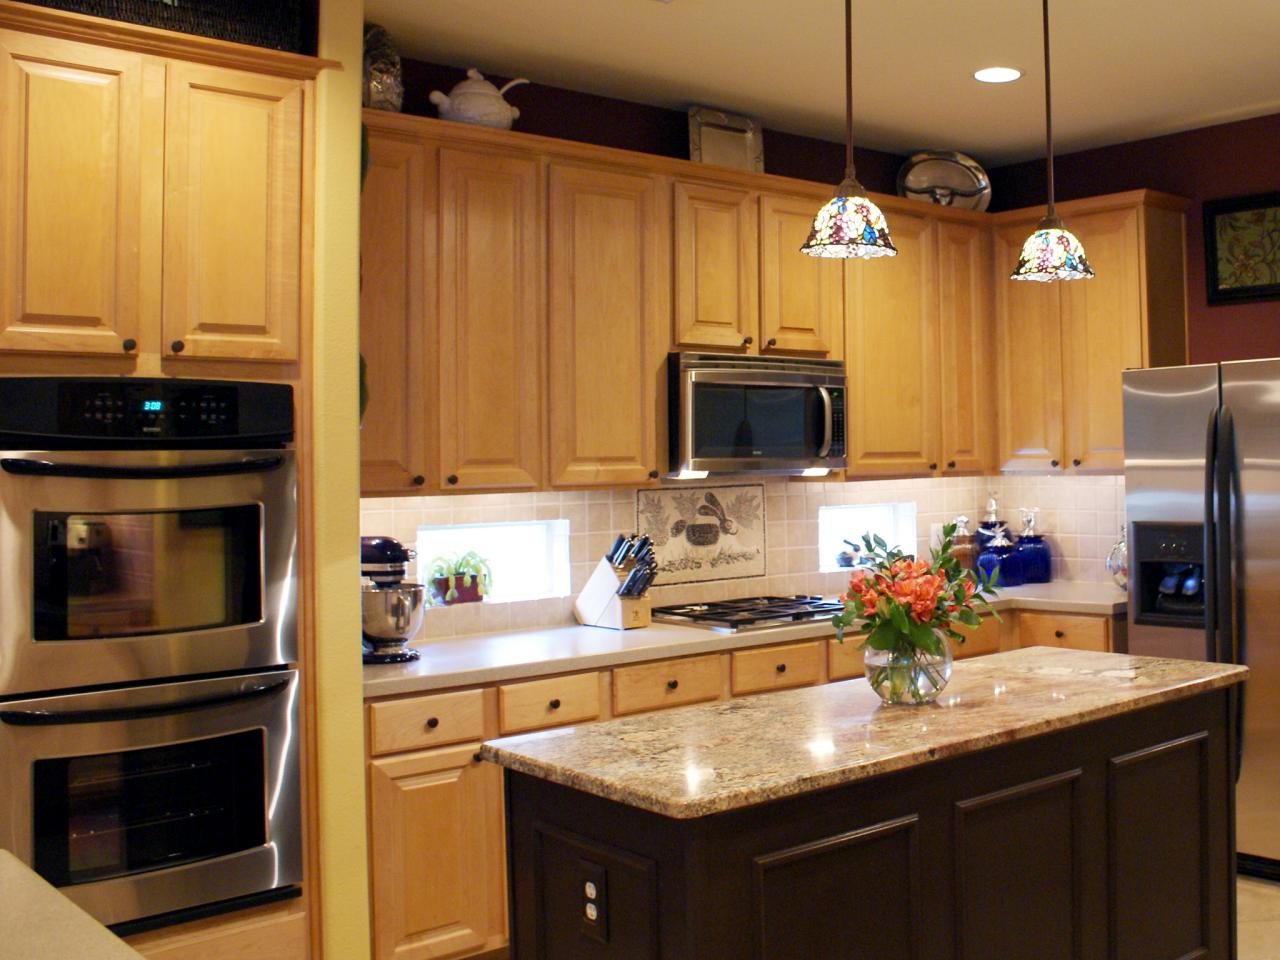 How much does it cost to replace the kitchen cabinets